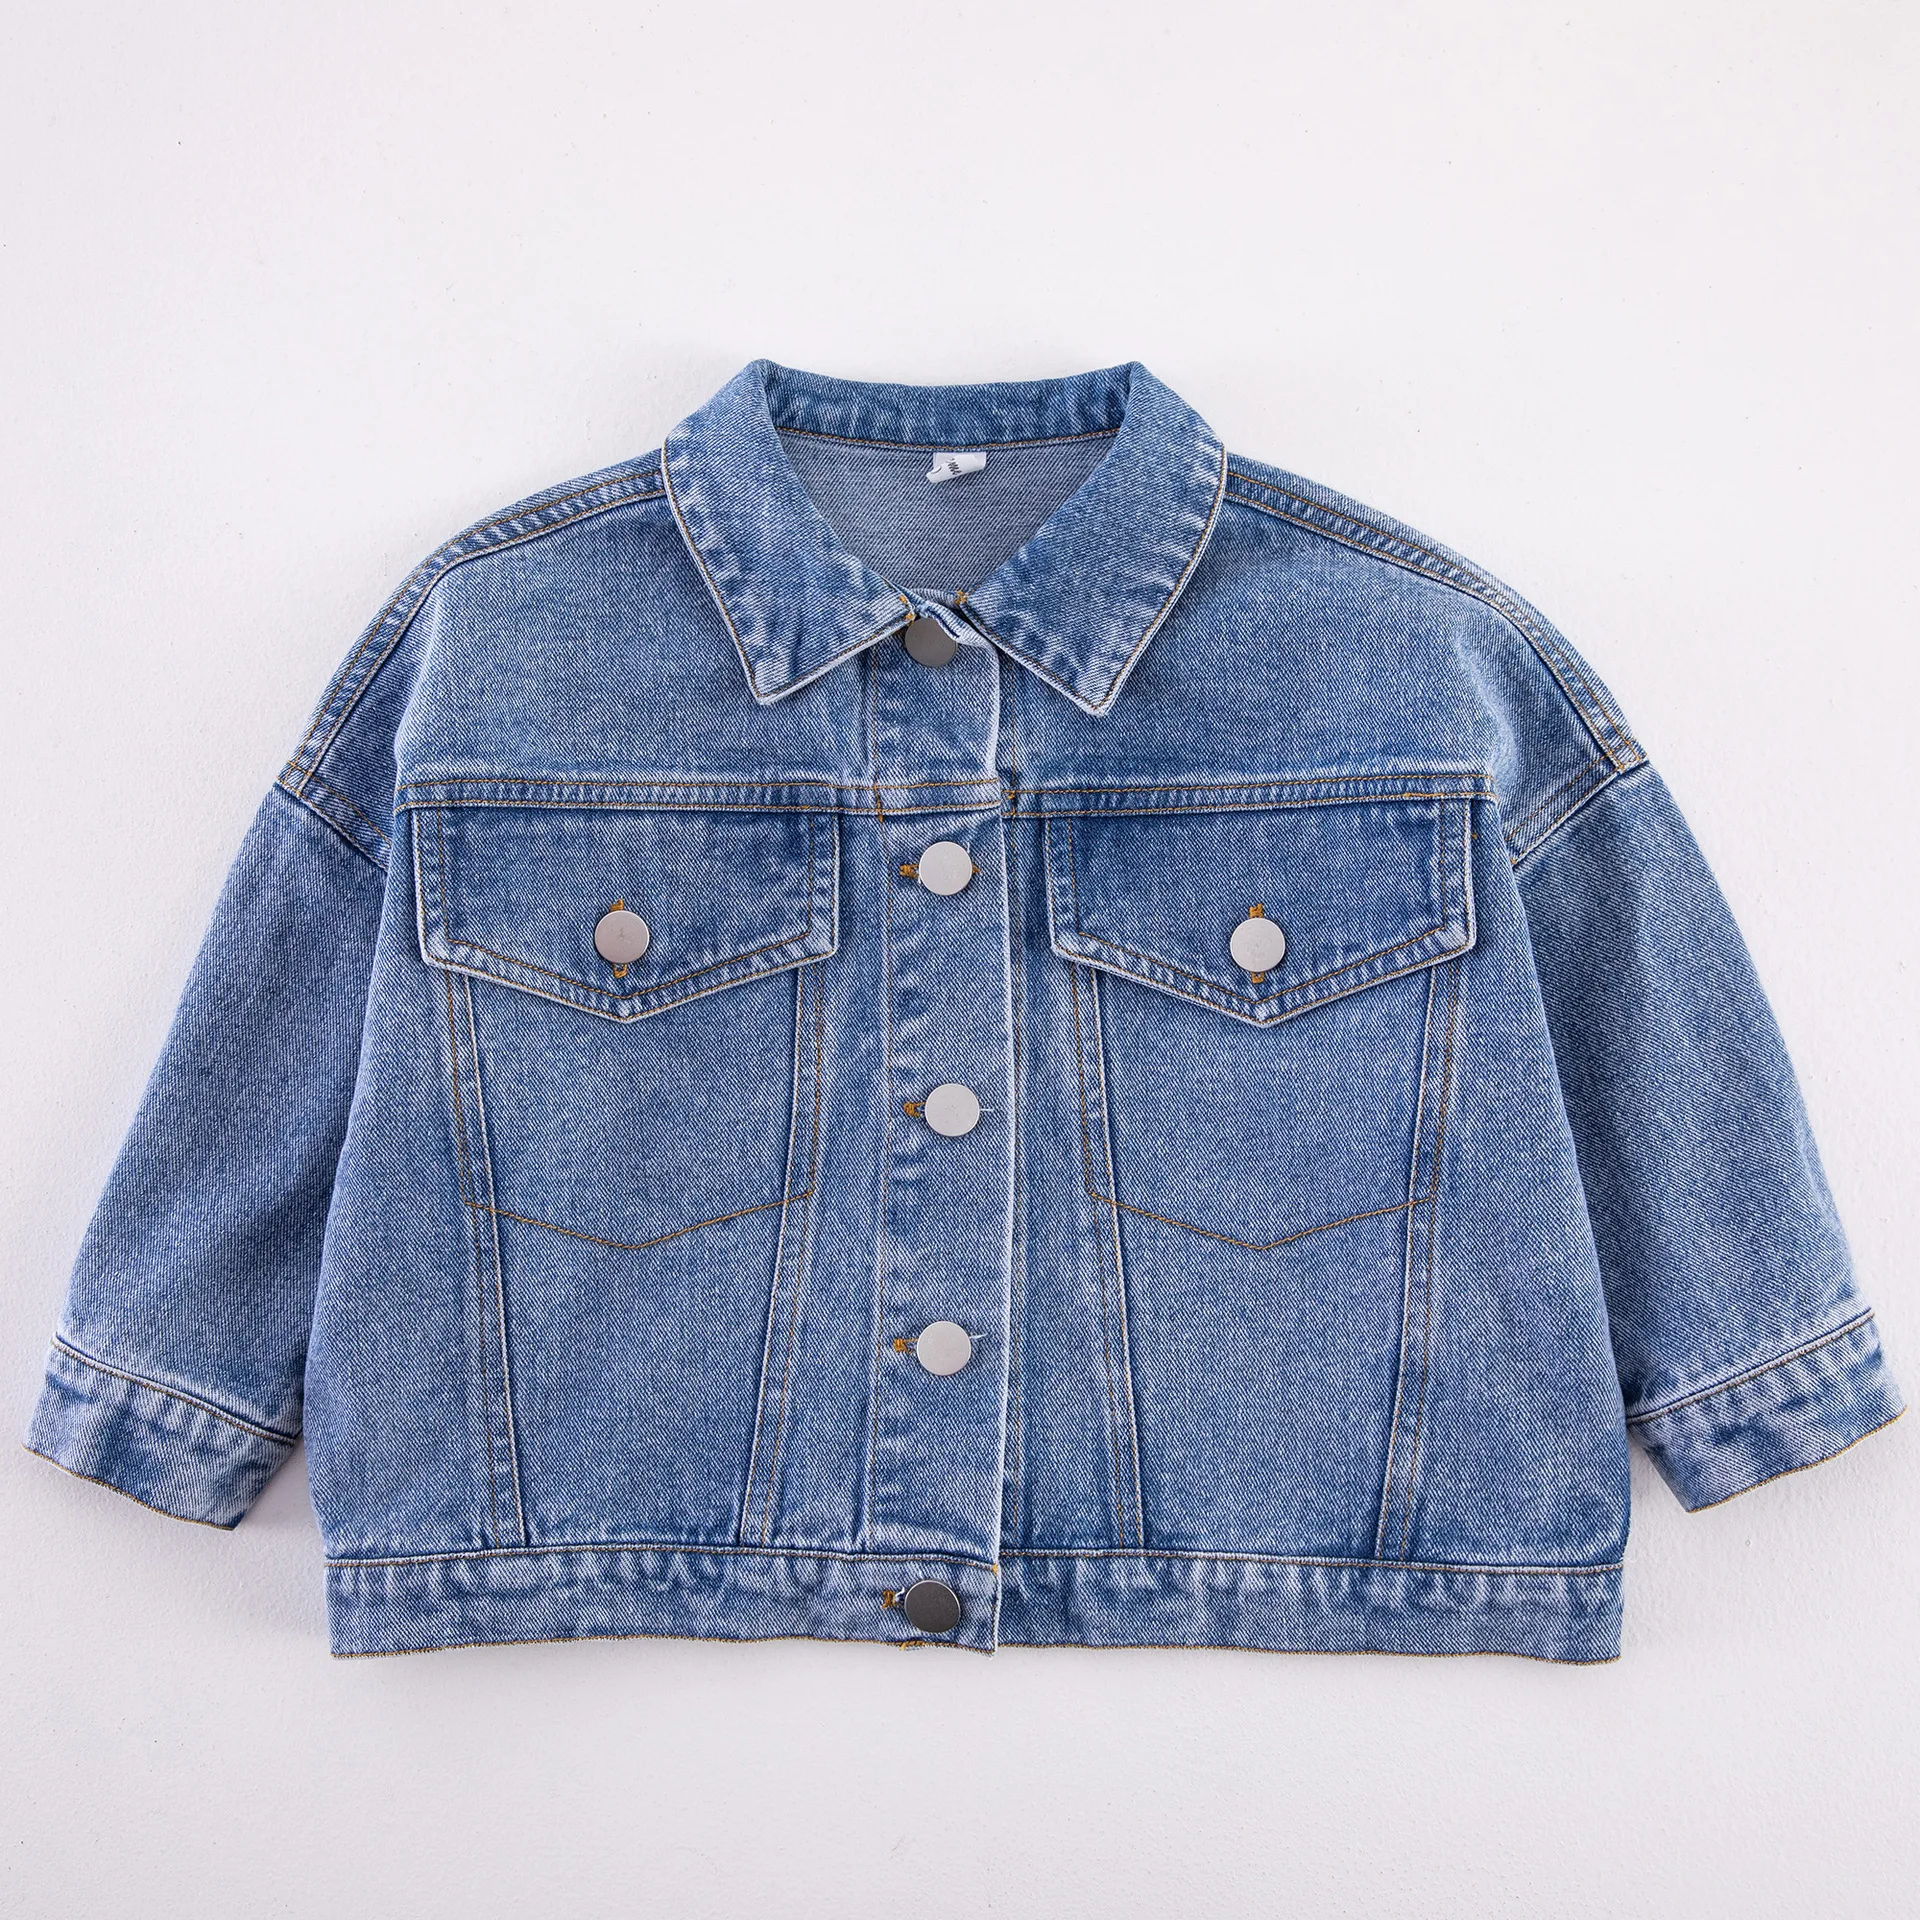 Korean children's clothing children's spring and autumn long-sleeved denim jacket small boys and girls baby cotton denim top images - 6